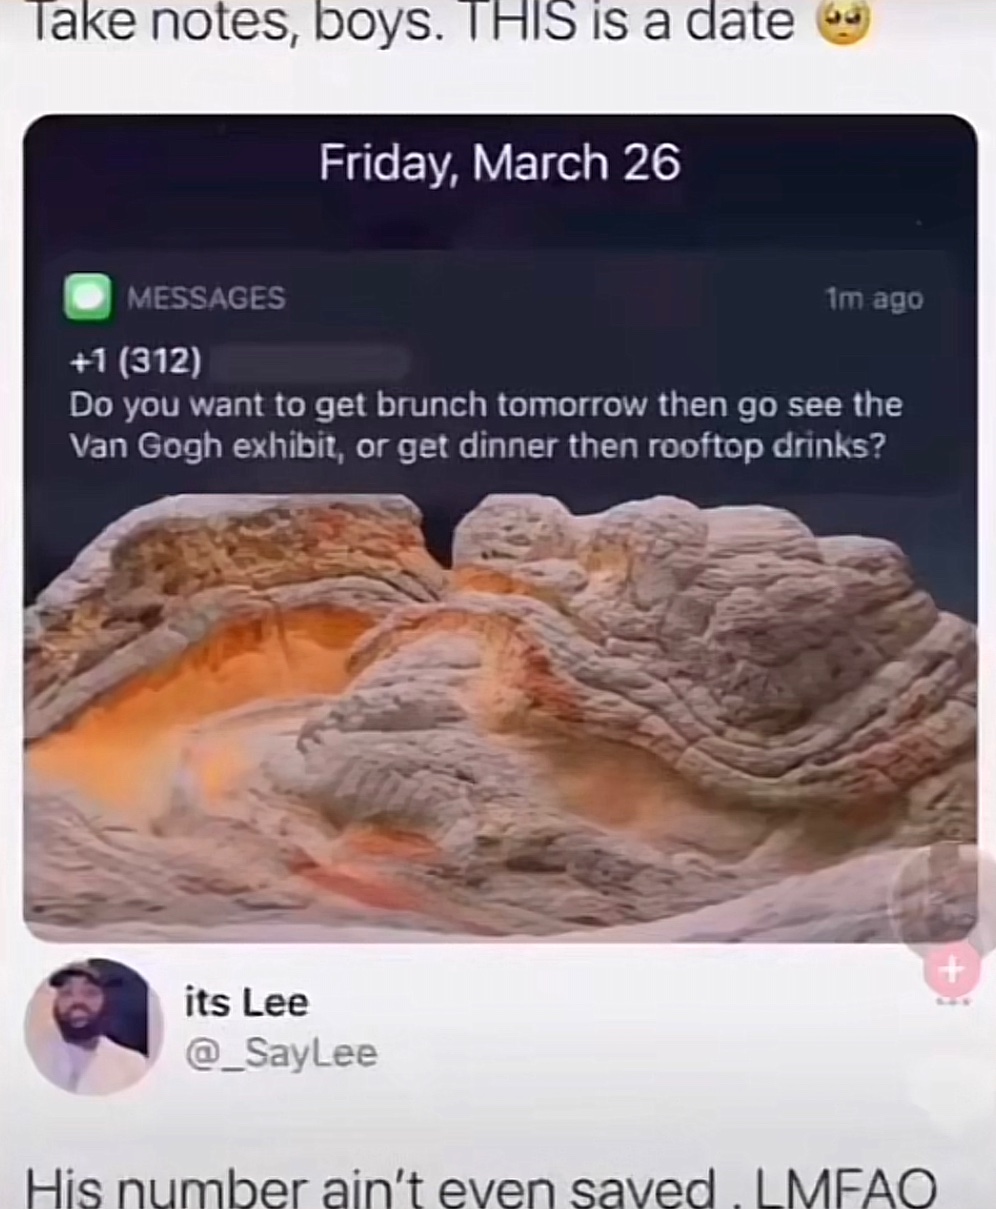 Dude's Taking L's Online - jaw - Take notes, boys. This is a date ou Friday, March 26 1m ago Messages 1 312 Do you want to get brunch tomorrow then go see the Van Gogh exhibit, or get dinner then rooftop drinks? its Lee His number ain't even saved. Lmfao